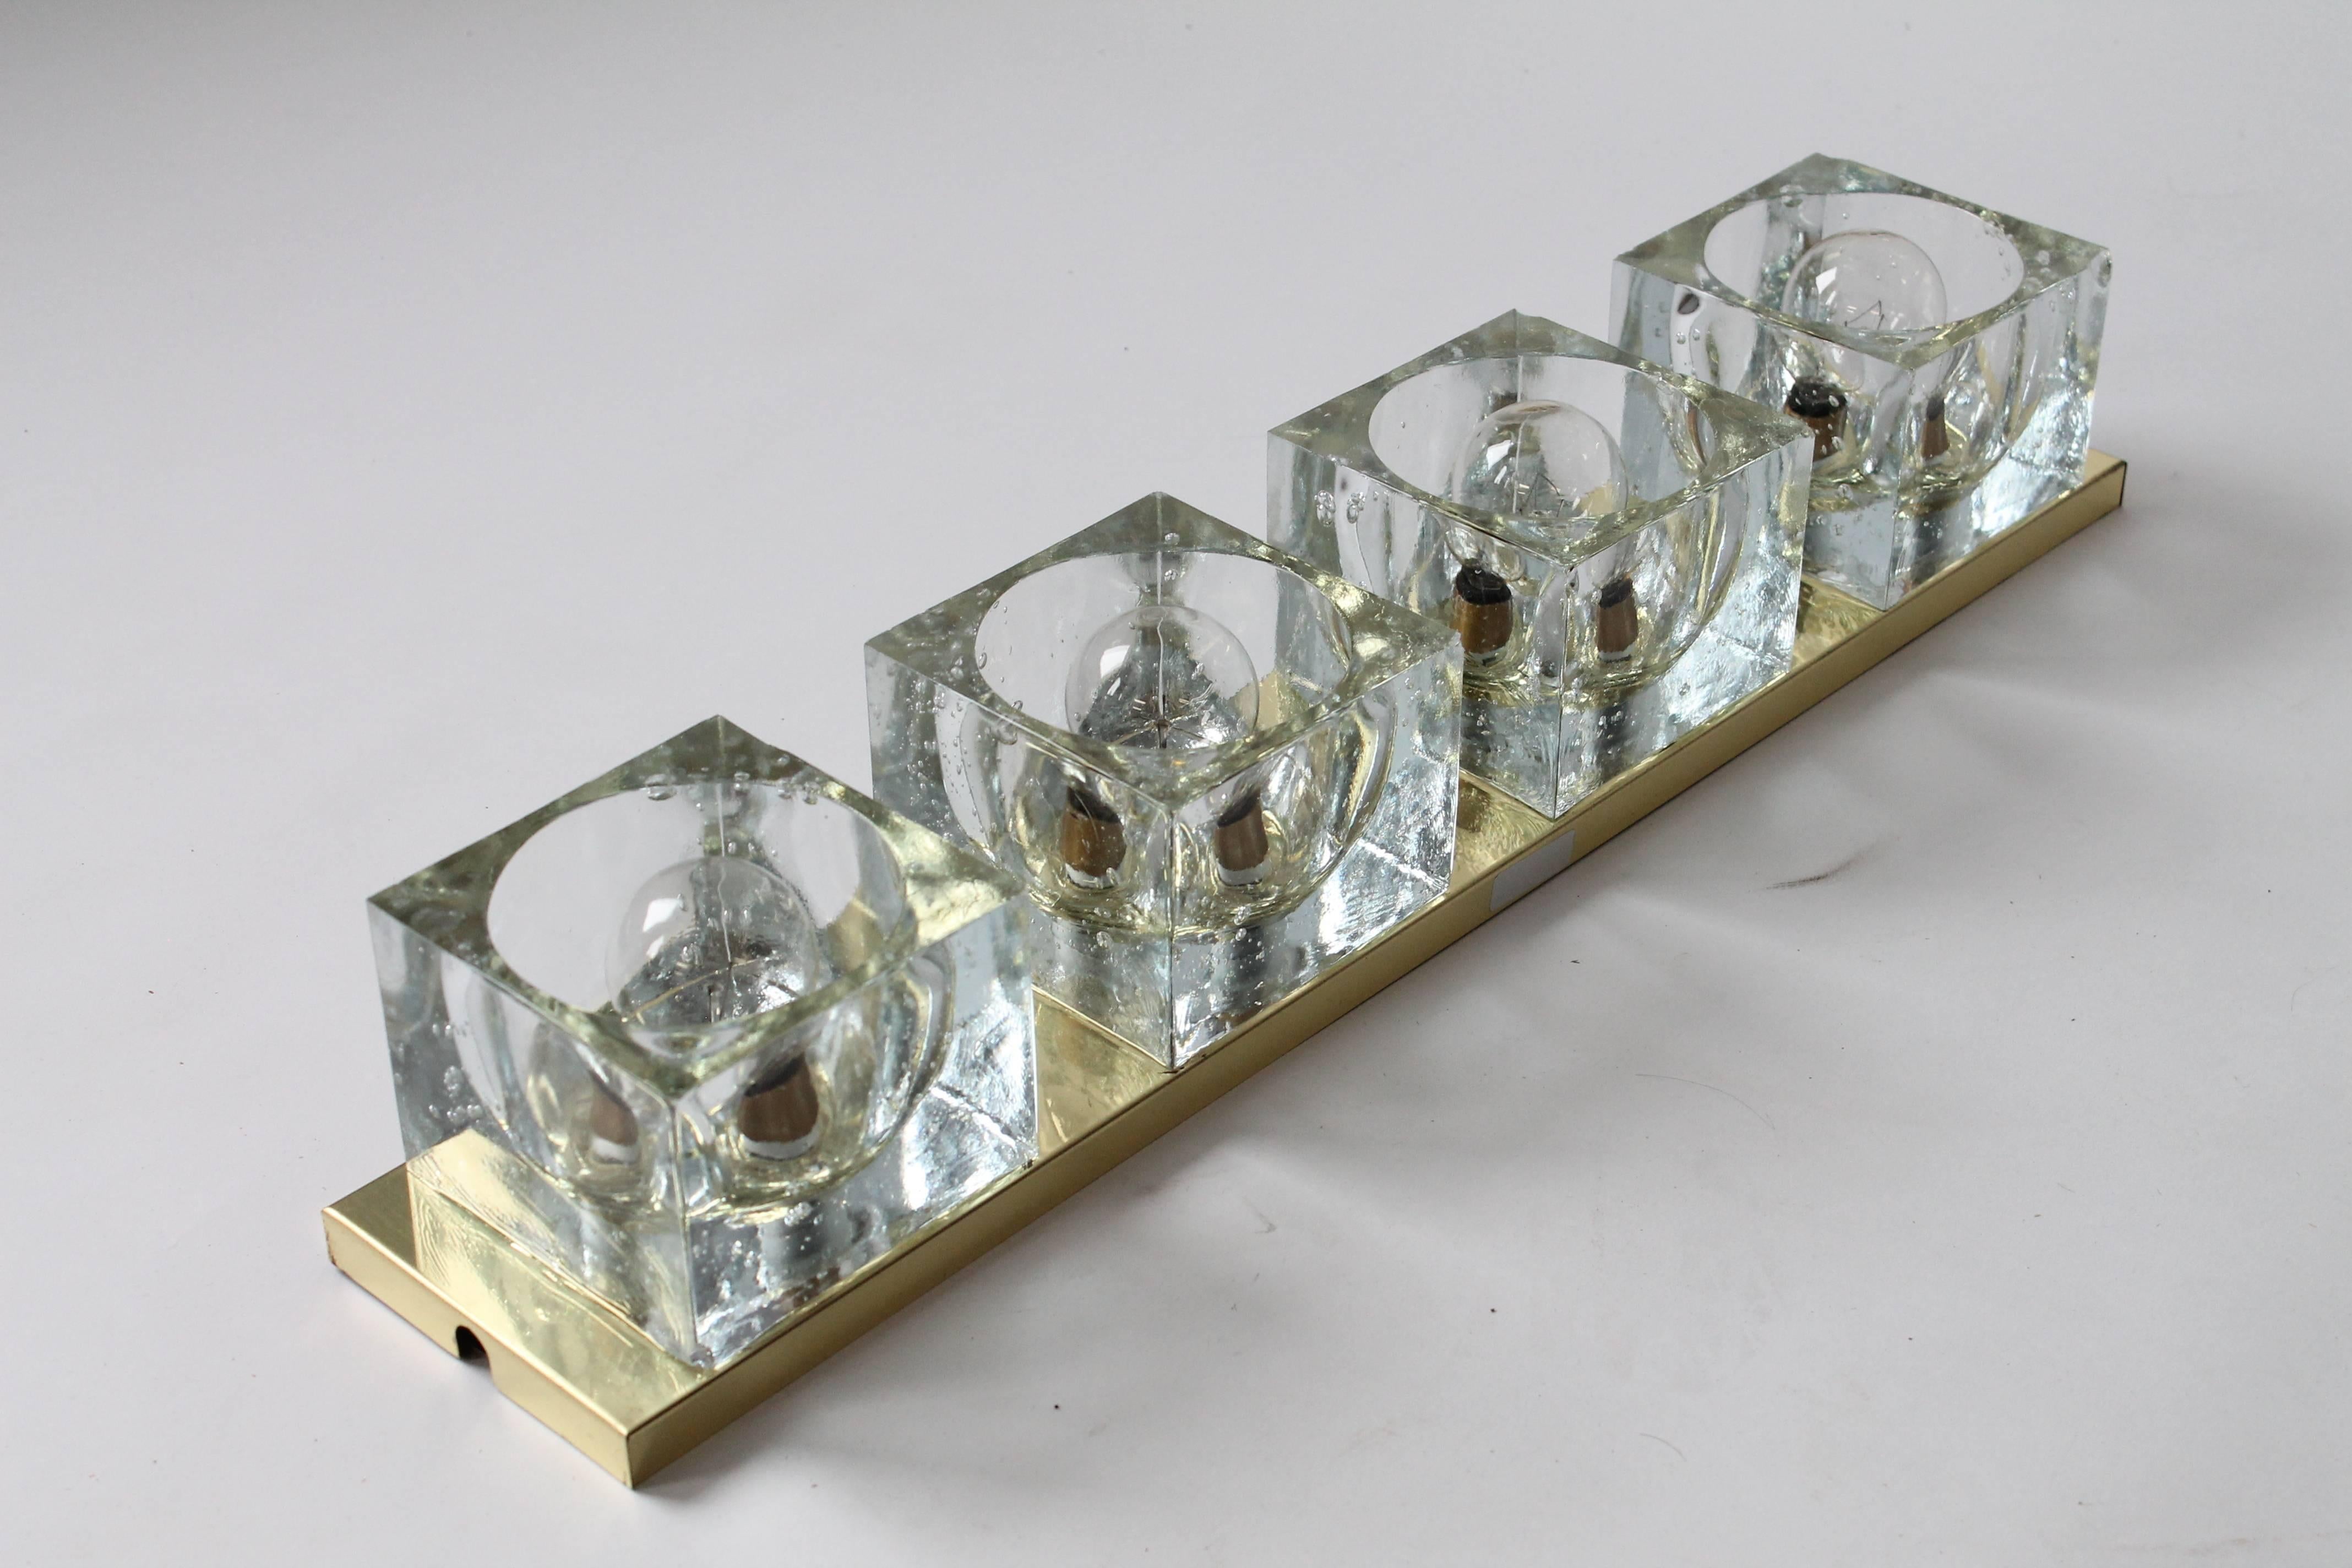 Light bounce everywhere on these big chunky thick glass cubes. 

Hand casted , full of lovely imperfection and air bubble. 

Weight 12 pounds per fixture. 

Often use as vanity light. 

Measure: 24 inches long by 4.5 inches wide.